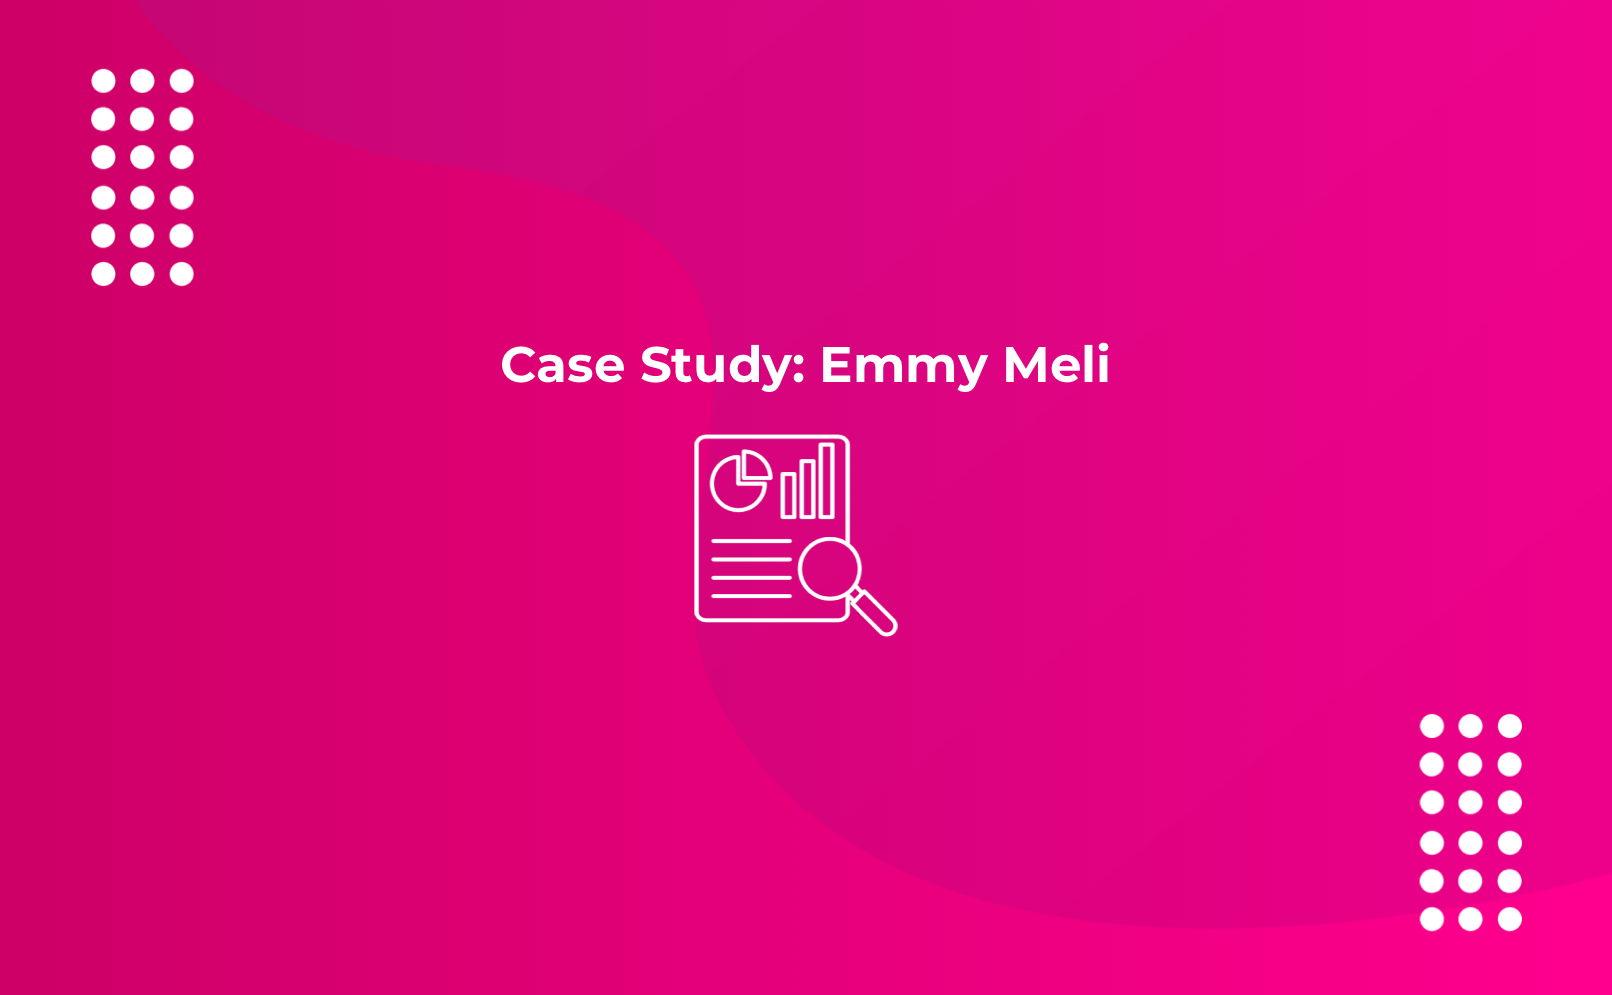 Case Study: How Emmy Meli got 125M Spotify streams in 4 months for "I am Woman"